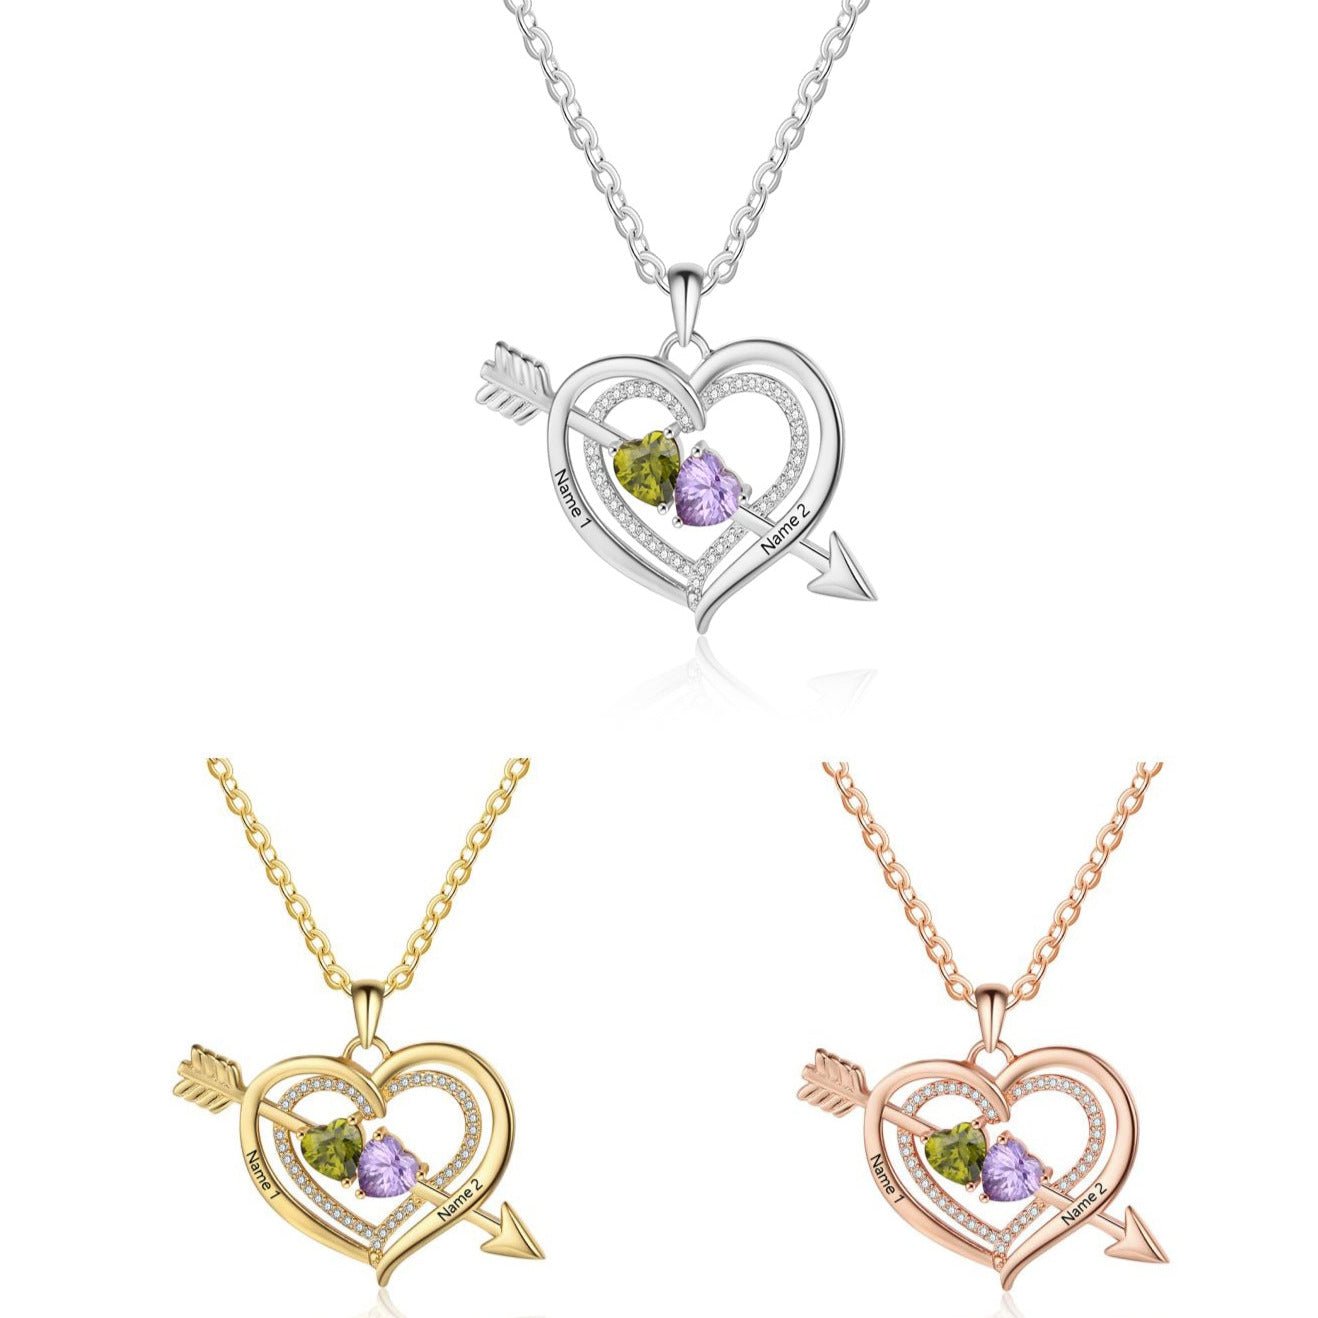 ThinkEngraved engraved necklace Personalized Mother's Necklace 2 Birthstones Cupid's Heart 2 Engraved Names